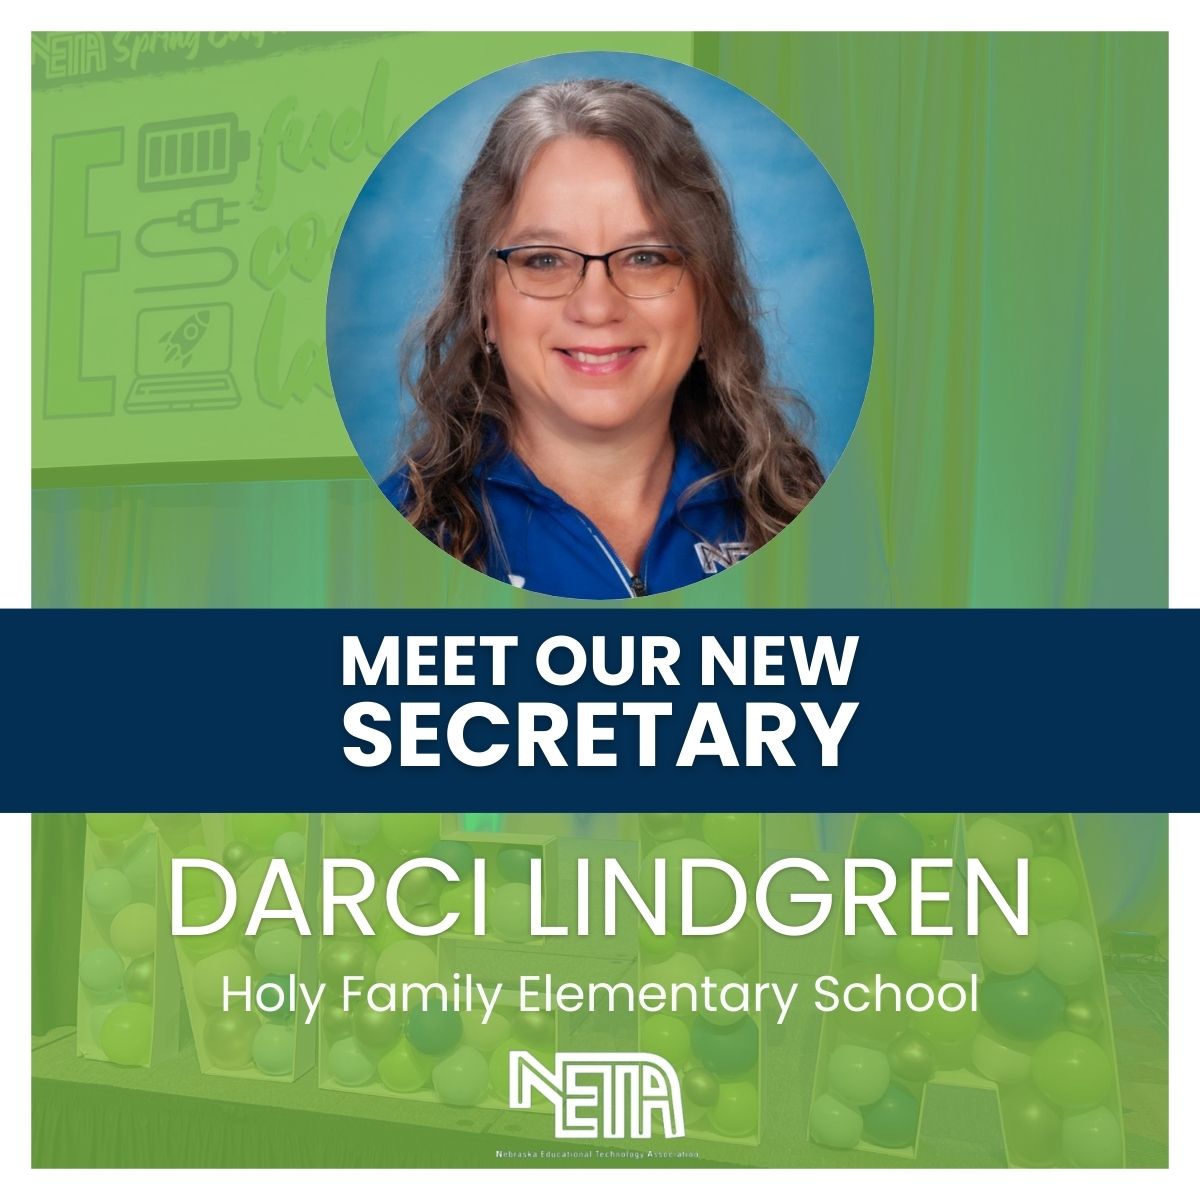 Let's give a big #yourNETA welcome back to one of our newest board members, Darci Lindgren from Holy Family Elementary School! Thank you for continuing to serve NETA members.